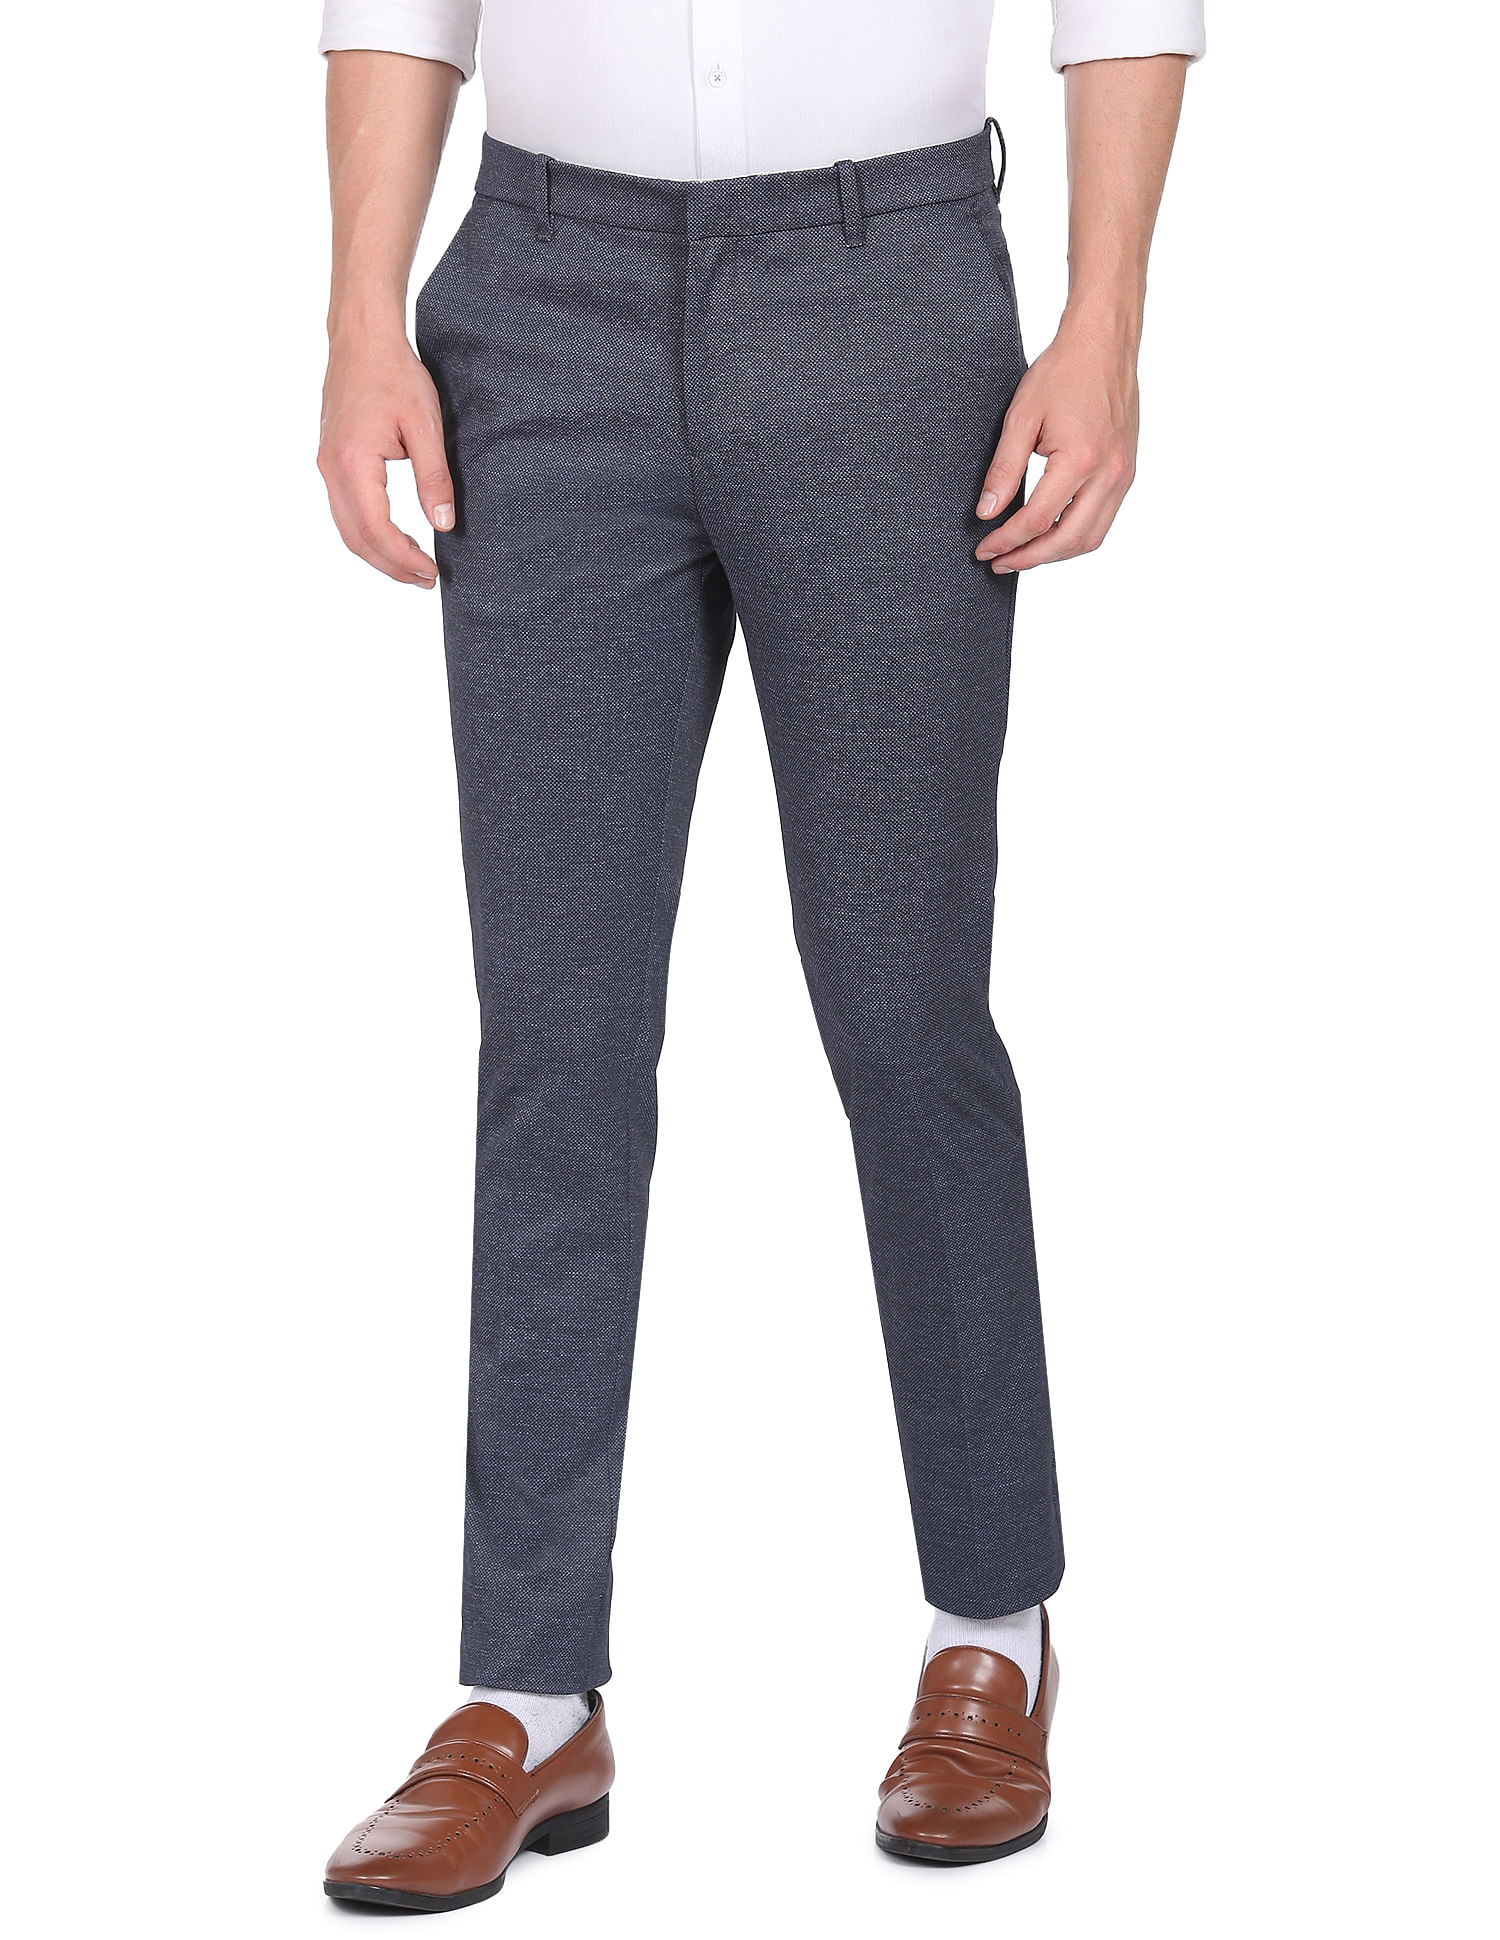 fcityin  Katro Navyblue And Lntgrey Formal Trouser For Mens  Casual